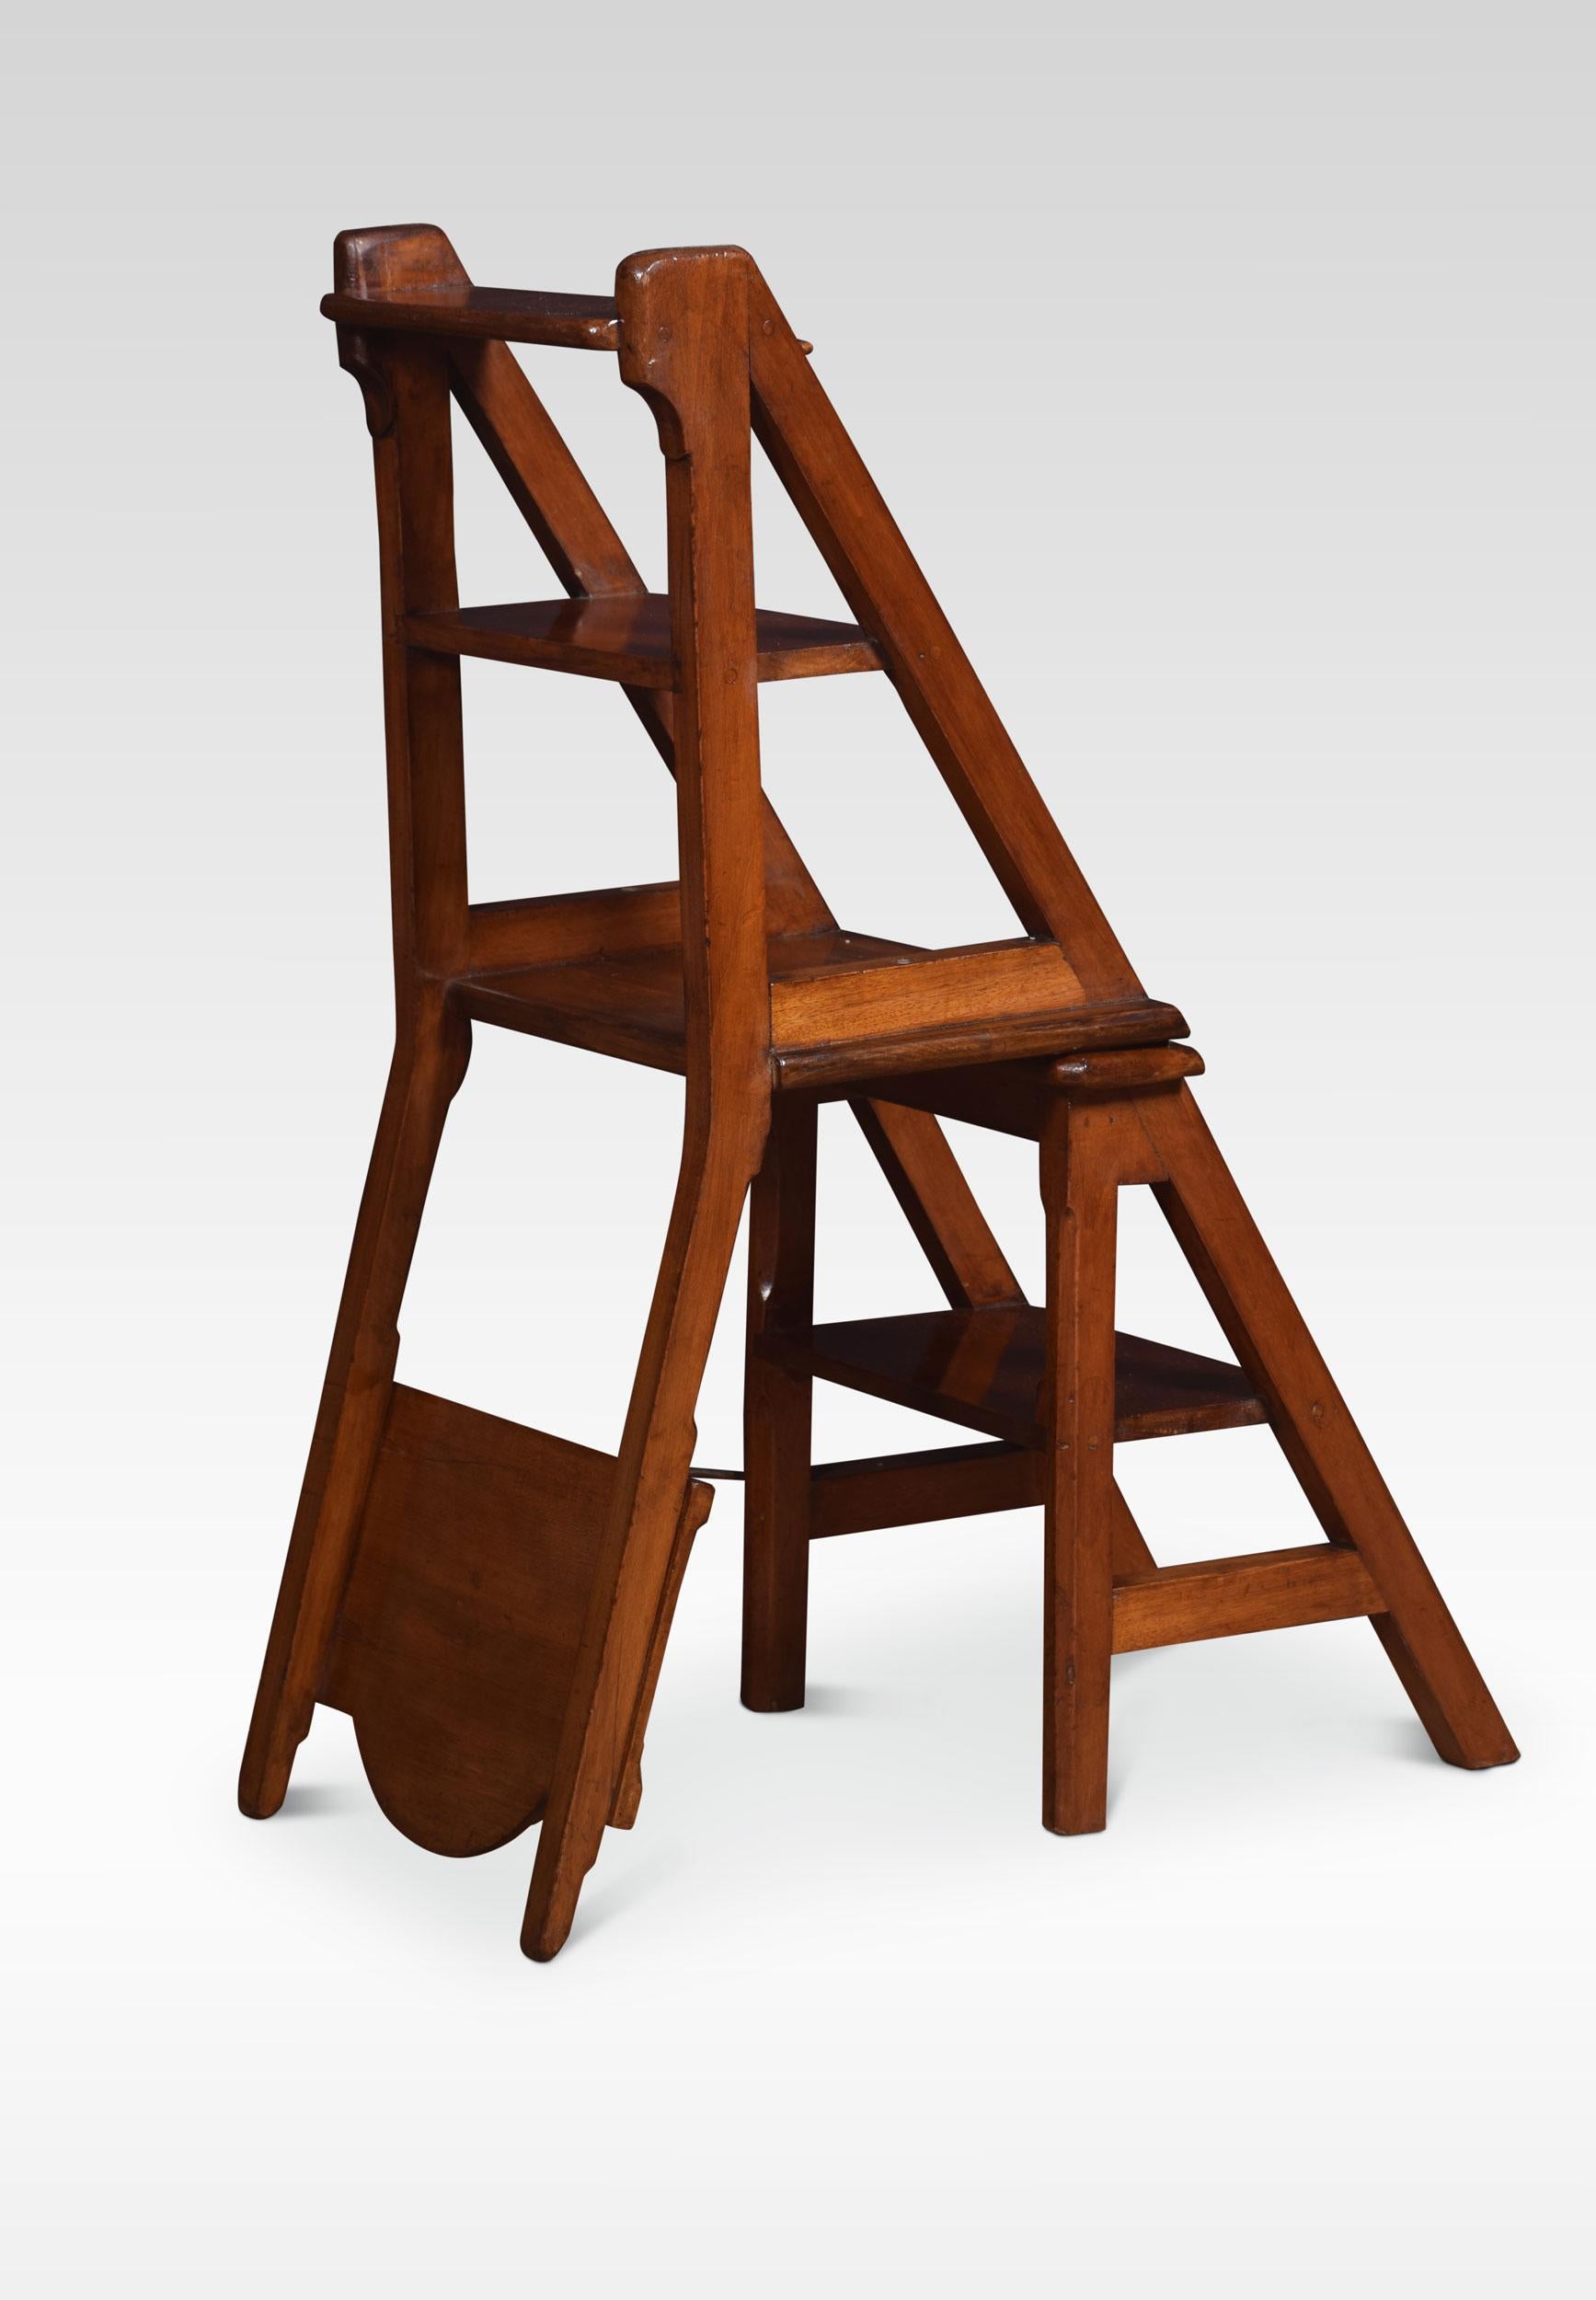 19th century walnut metamorphic chair, the shaped back with central circular carved detail. Above the solid seat, raised up on square supports united by stretchers. The chair opens into a sturdy set of Library steps.

Dimensions:
Height 34 inches